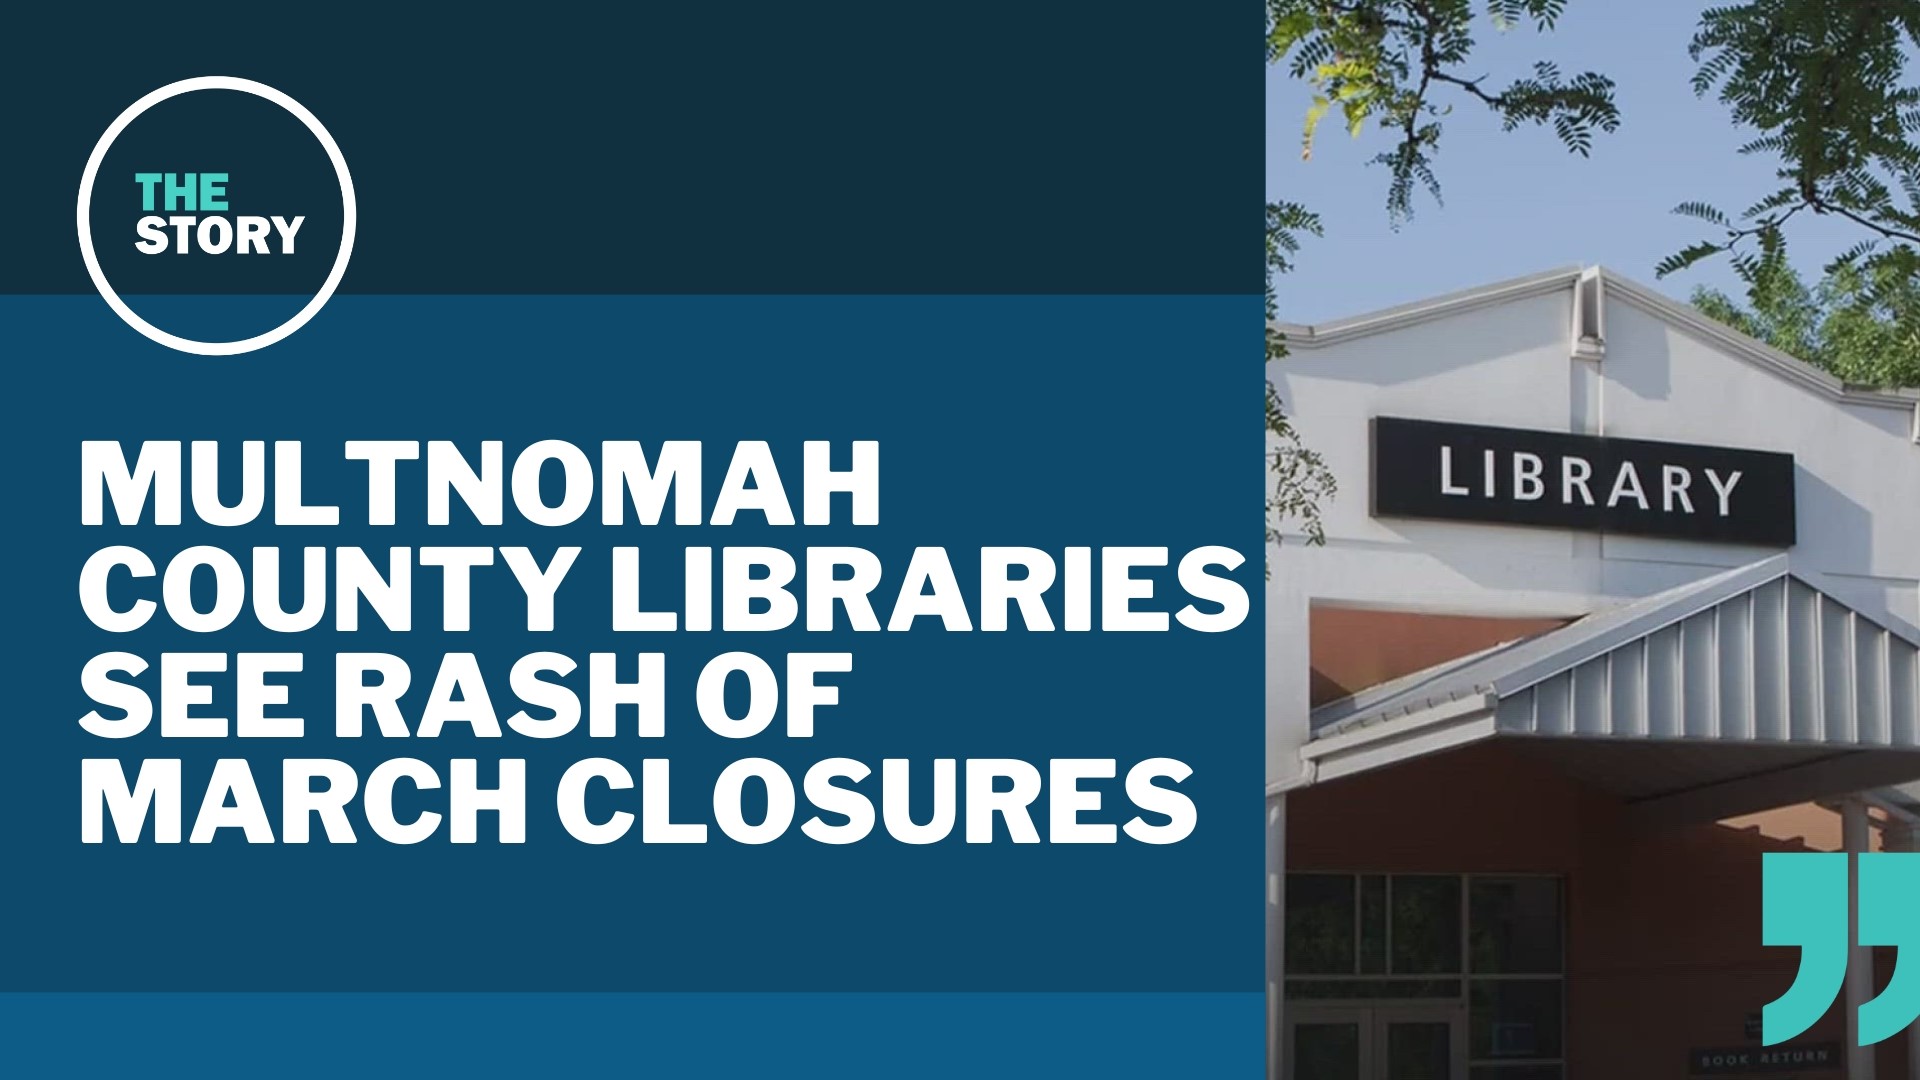 Understaffing is an issue, but a new agreement with the union for library employees also gives staff more agency in deciding what problems they're able to deal with.